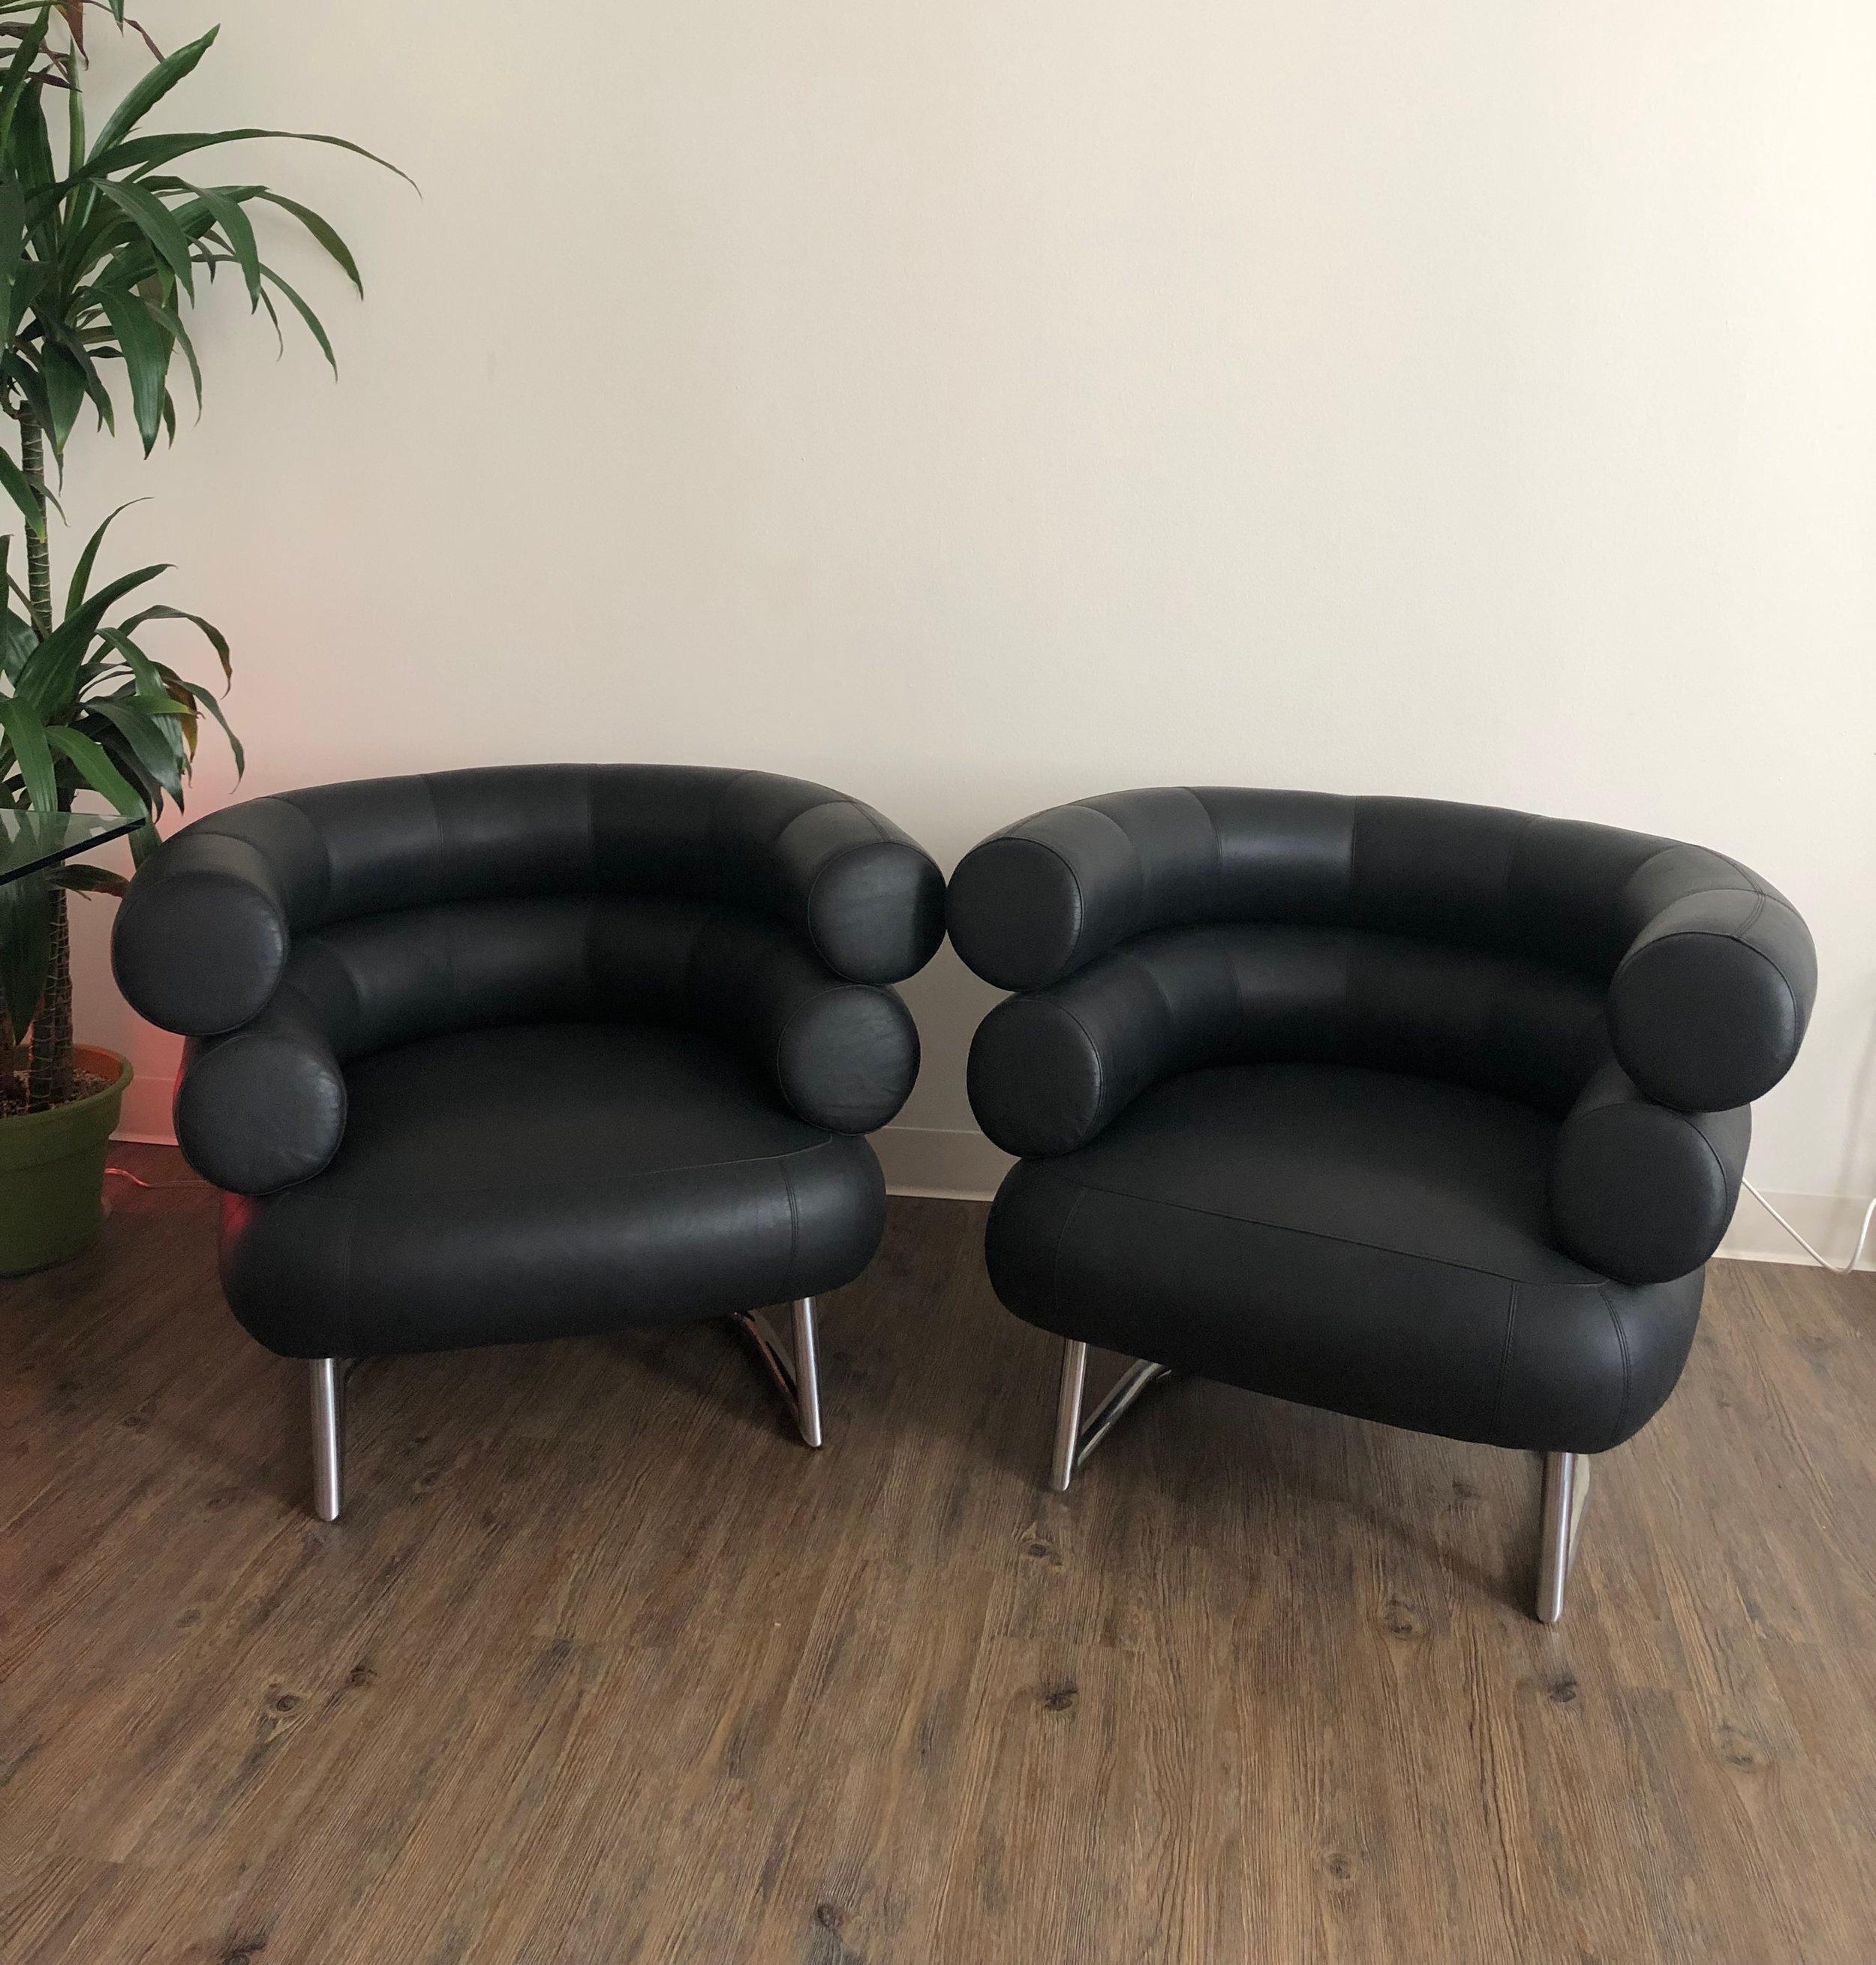 The BIBENDUM Chair:  Is A Design by Eileen Gray 1926 / 1927.
This Listing Is For 2 Black Leather BIBENDUM CHAIRS 1980s. The BIBENDUM ARMCHAIR Is An Art Deco Design by Eileen Gray.
Gray Used This Design Piece In Many Of Her Interior Projects.  Eileen